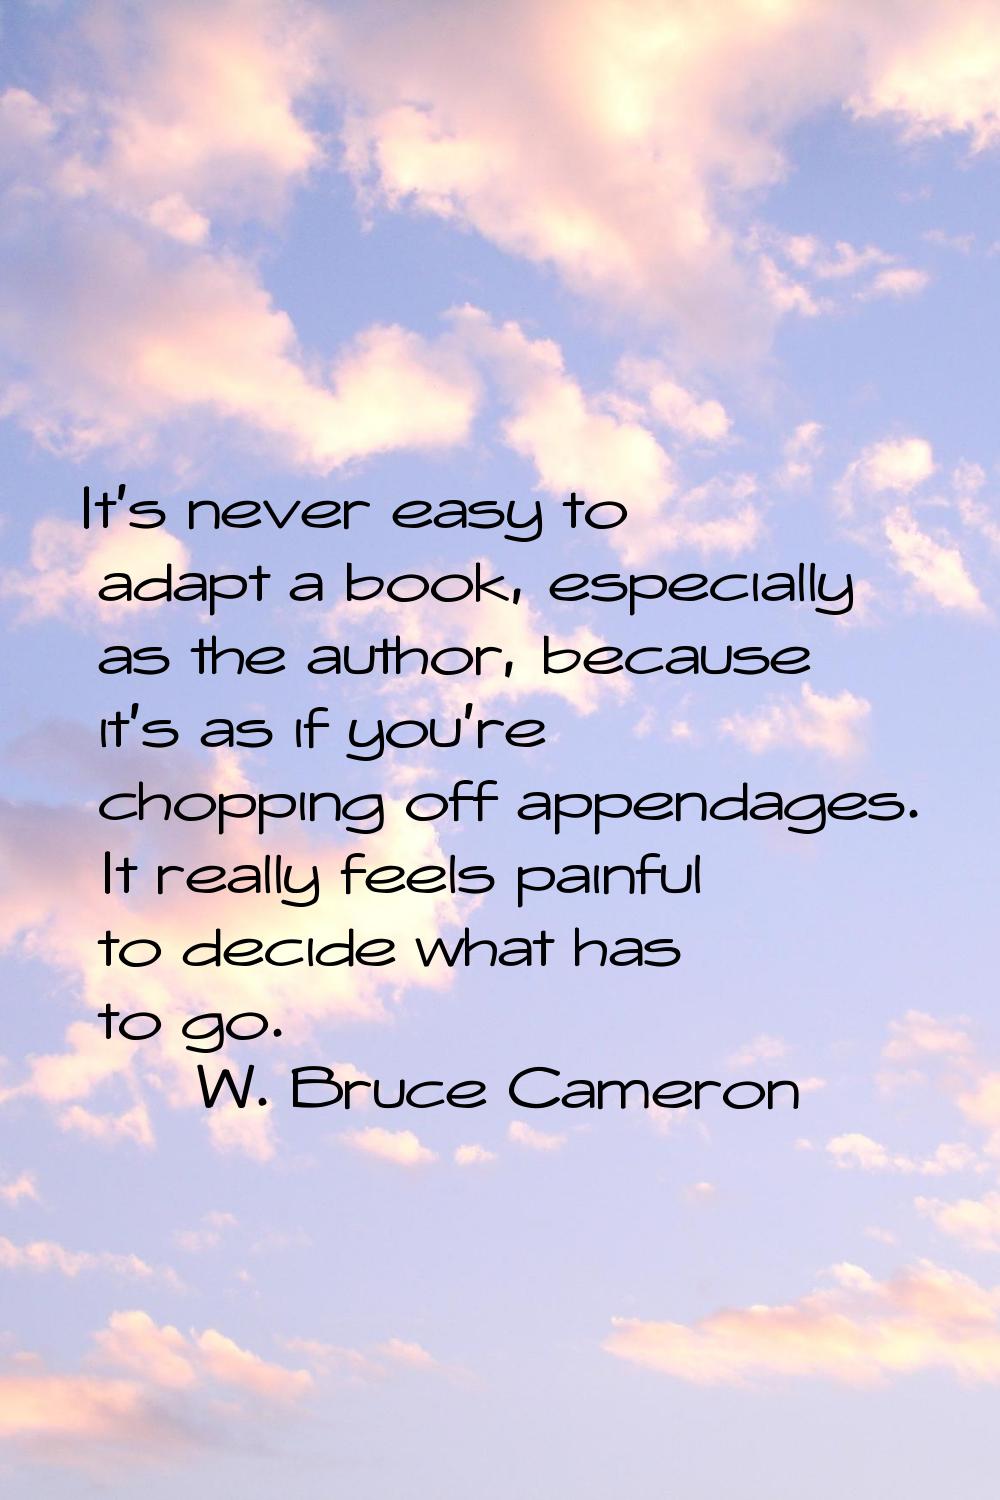 It's never easy to adapt a book, especially as the author, because it's as if you're chopping off a